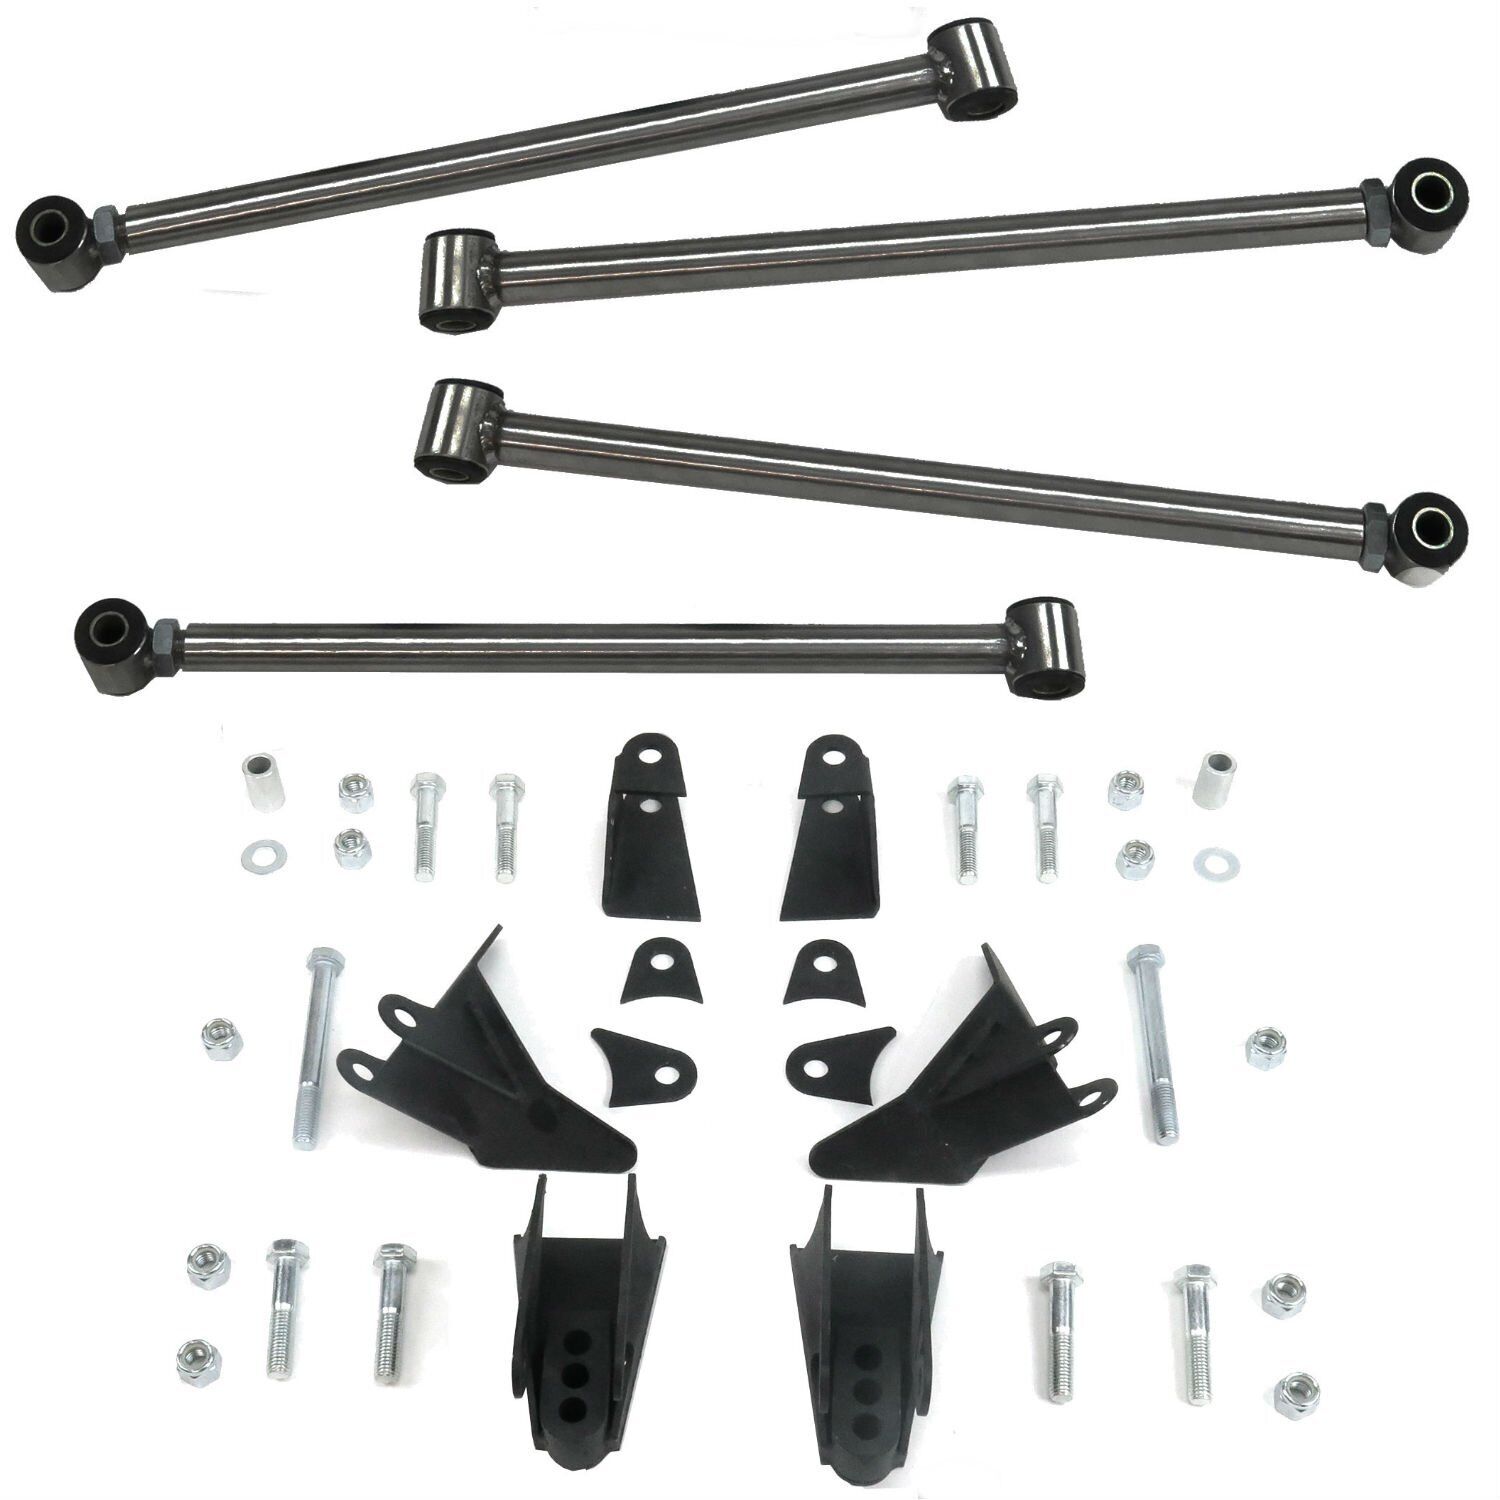 Triangulated Rear Suspension Four 4 Link Kit for 60-70 Falcon fits tci shocks